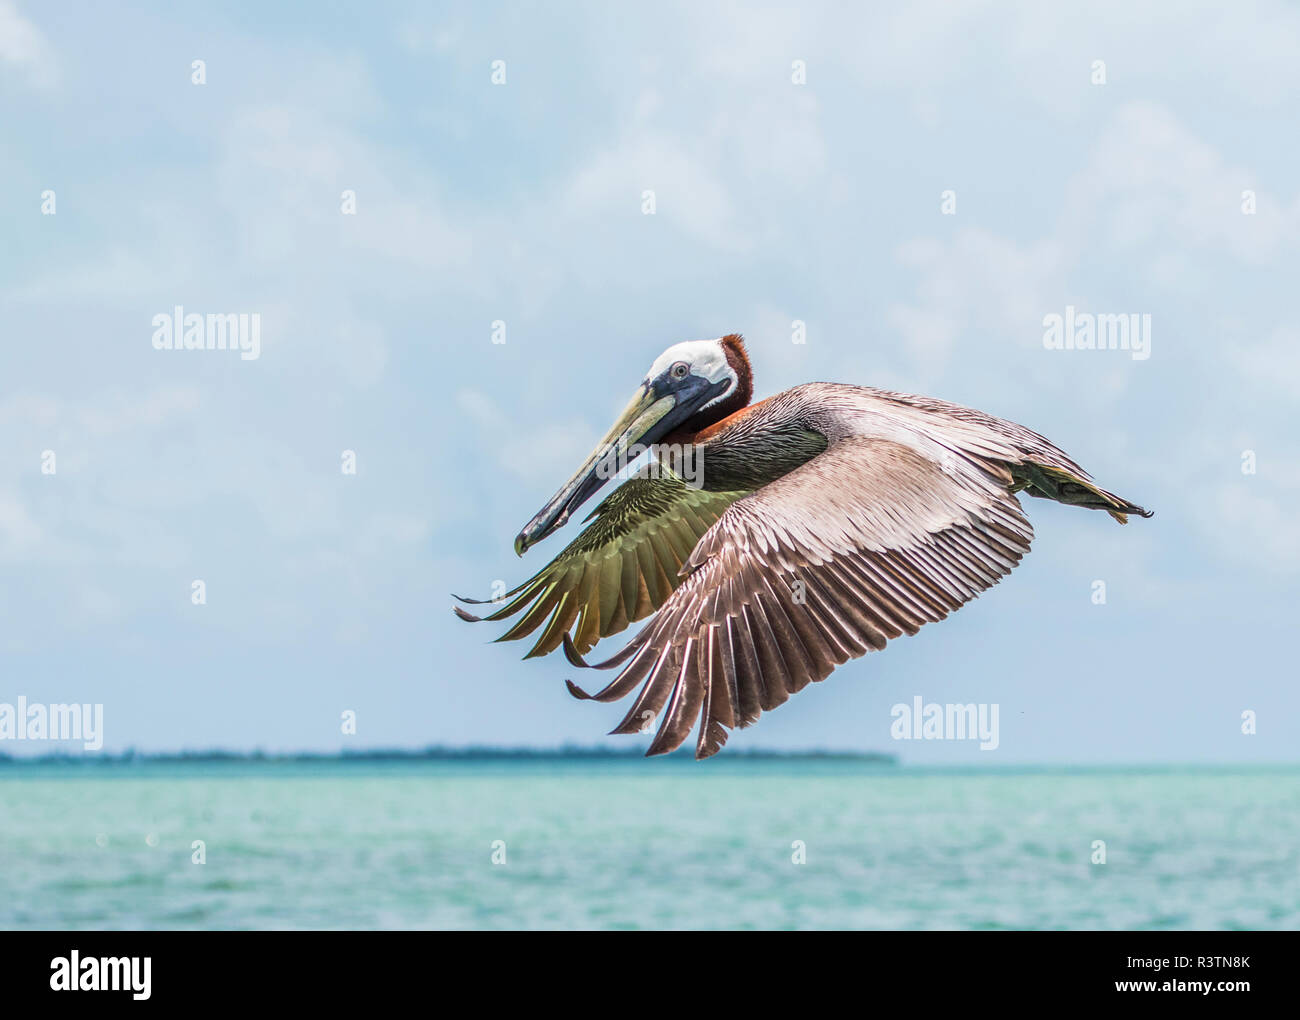 Belize, Ambergris Caye. Adult Brown Pelican flies over the Caribbean Sea Stock Photo